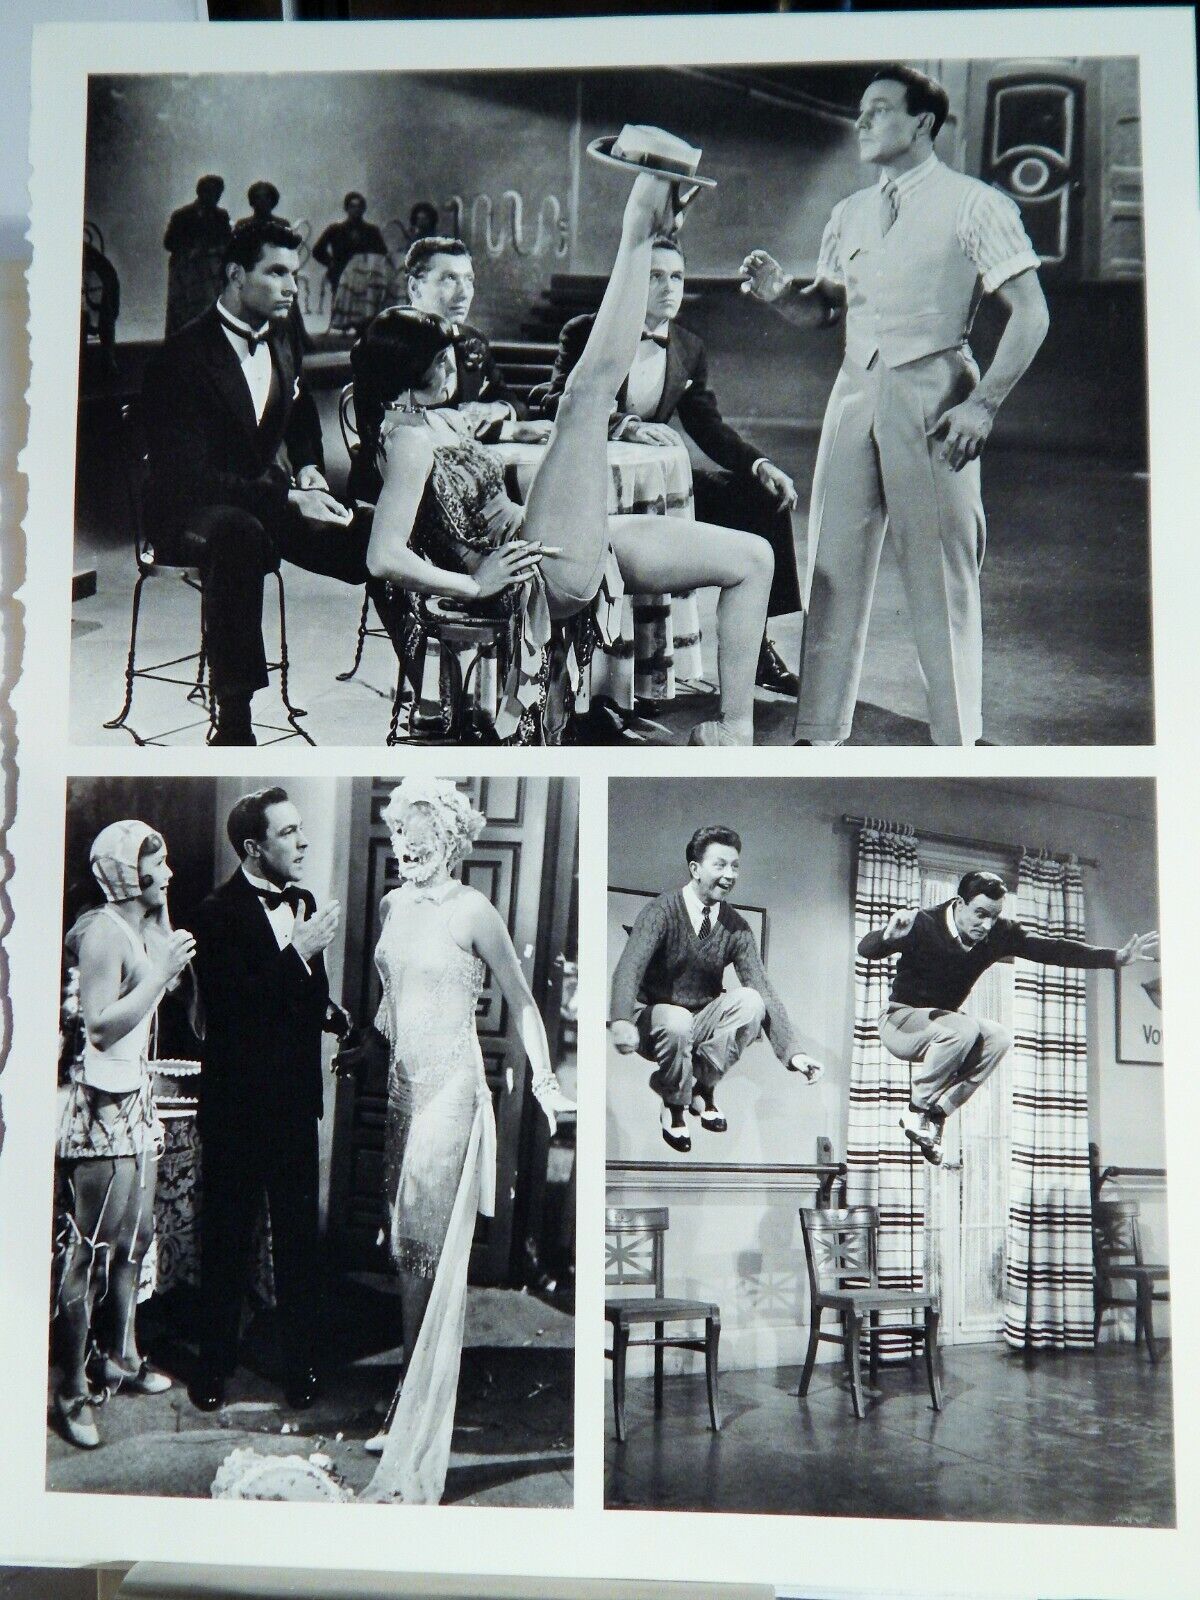 SINGIN IN THE RAIN (CYD CHARISSE, GENE KELLY) MOVIE Photo Poster painting (1985 reprint)